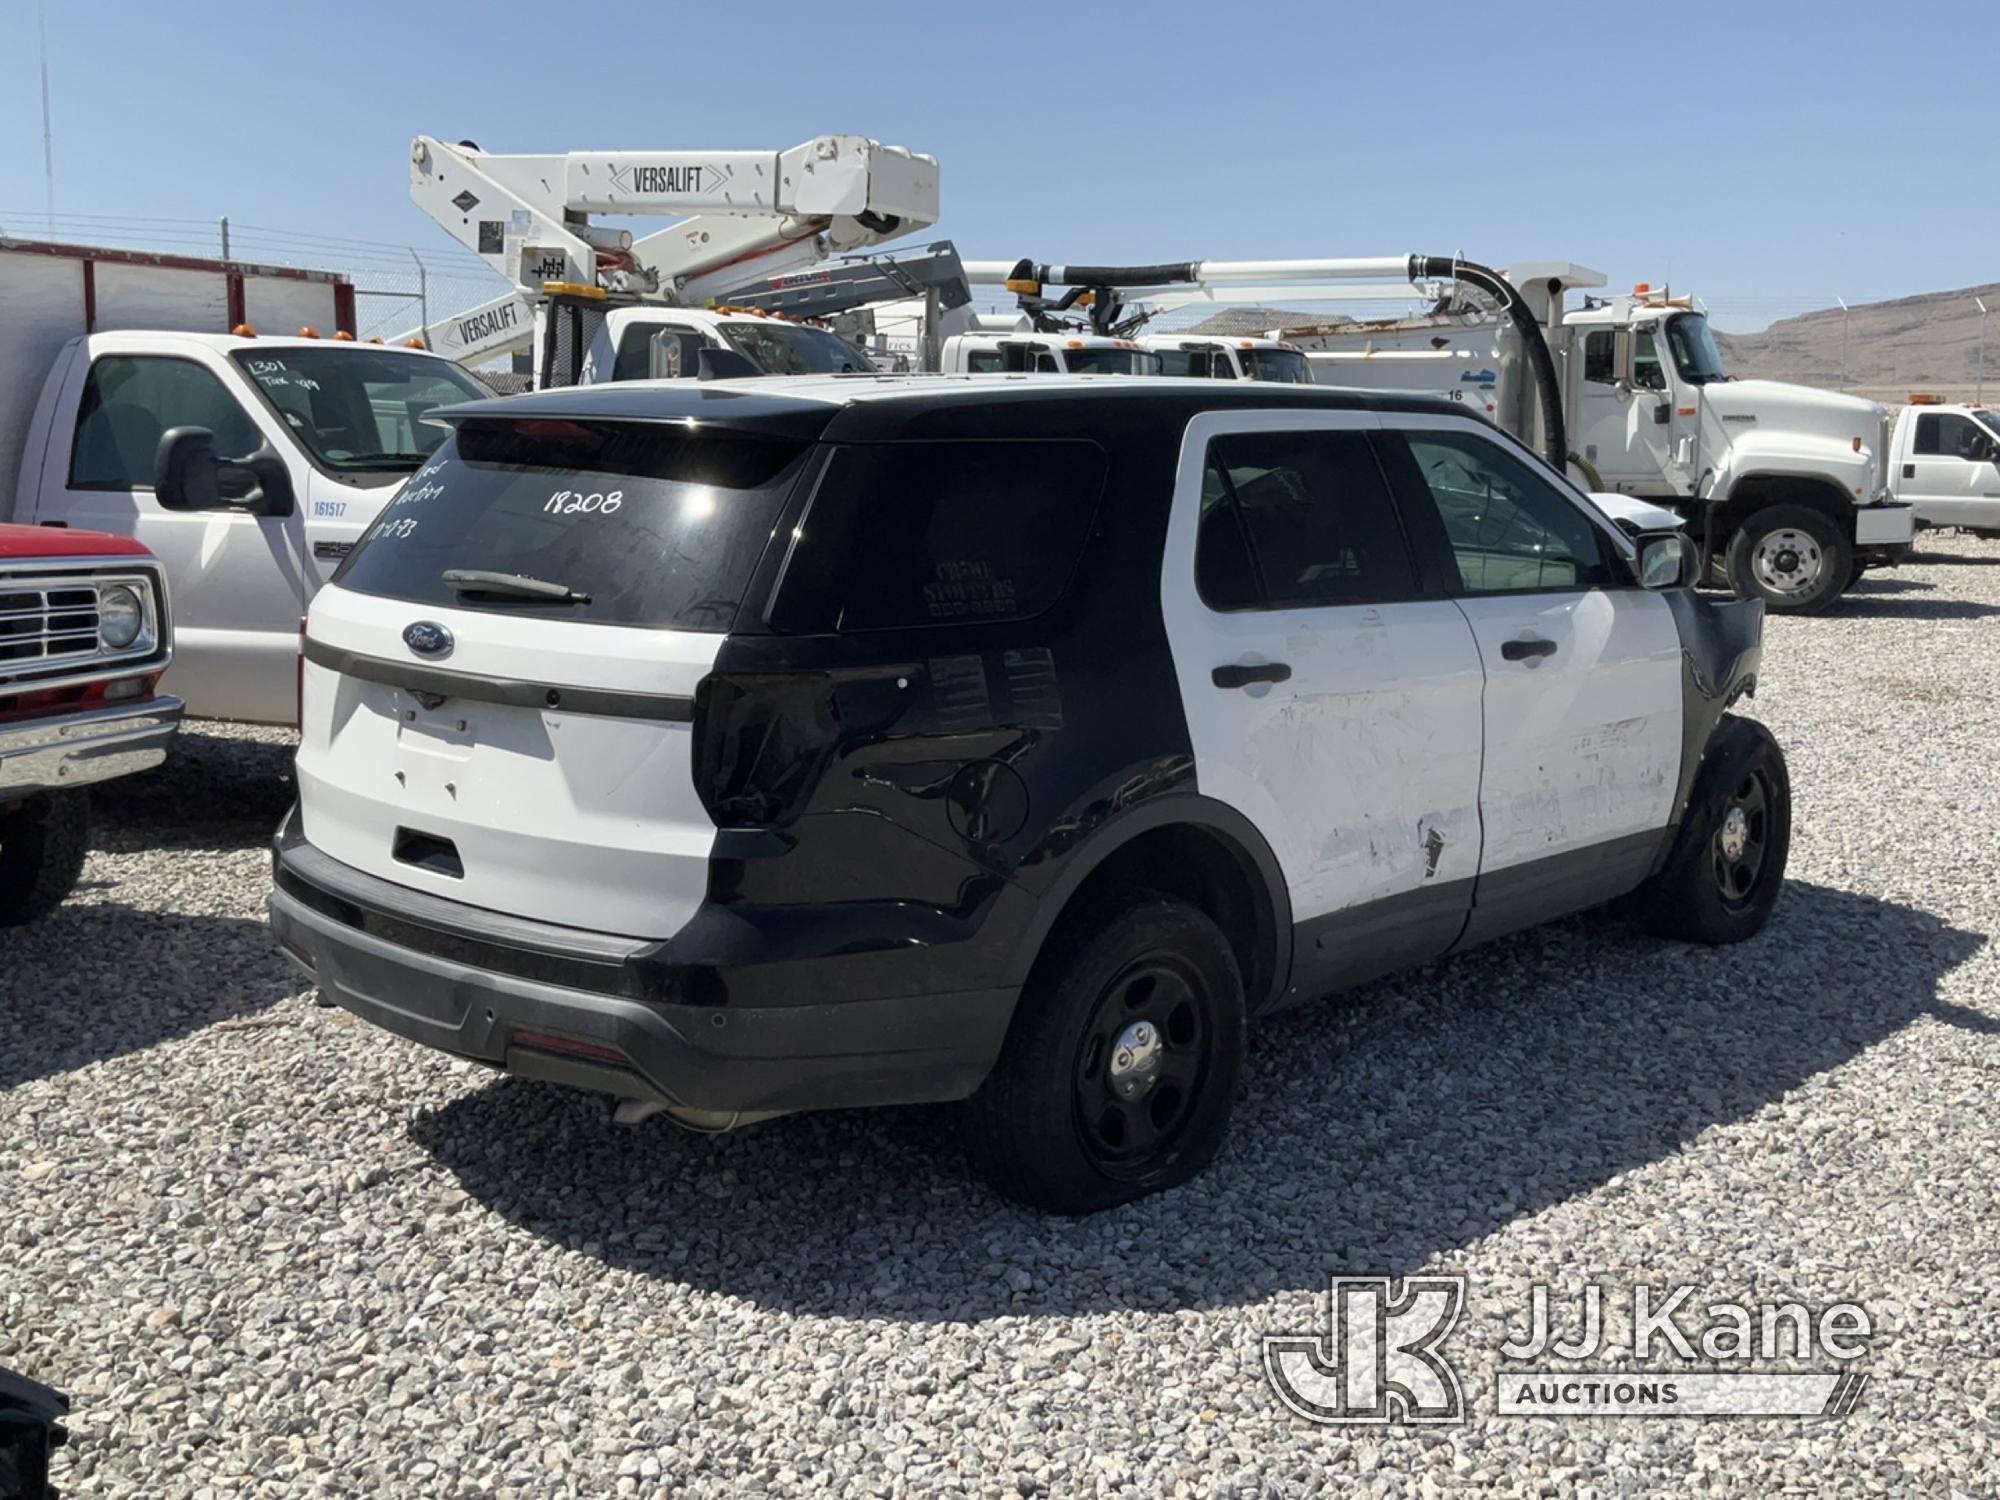 (Las Vegas, NV) 2018 Ford Explorer AWD Police Interceptor Dealers Only, Wrecked, Towed In, No Consol